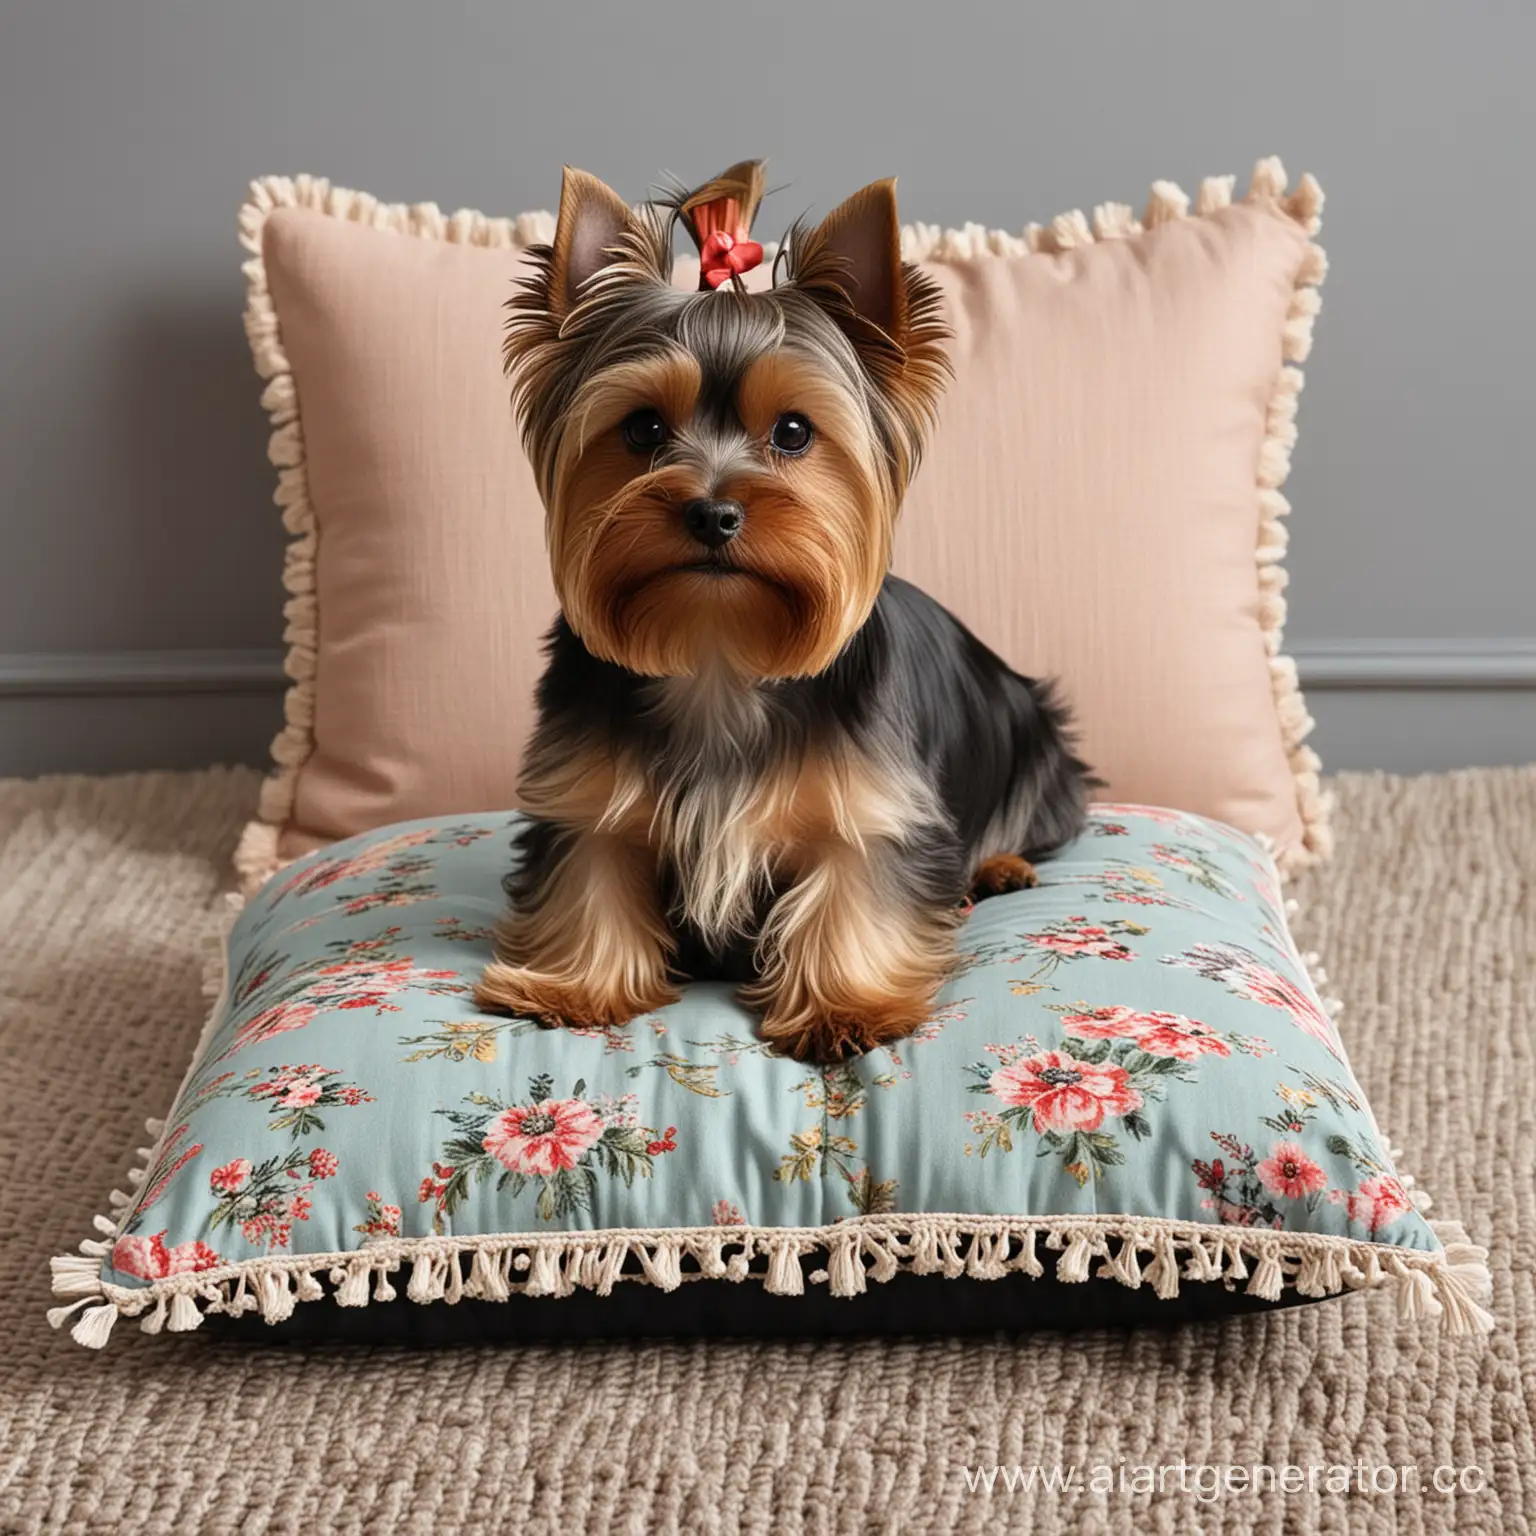 Adorable-Yorkshire-Terrier-Sitting-on-a-Decorative-Cushion